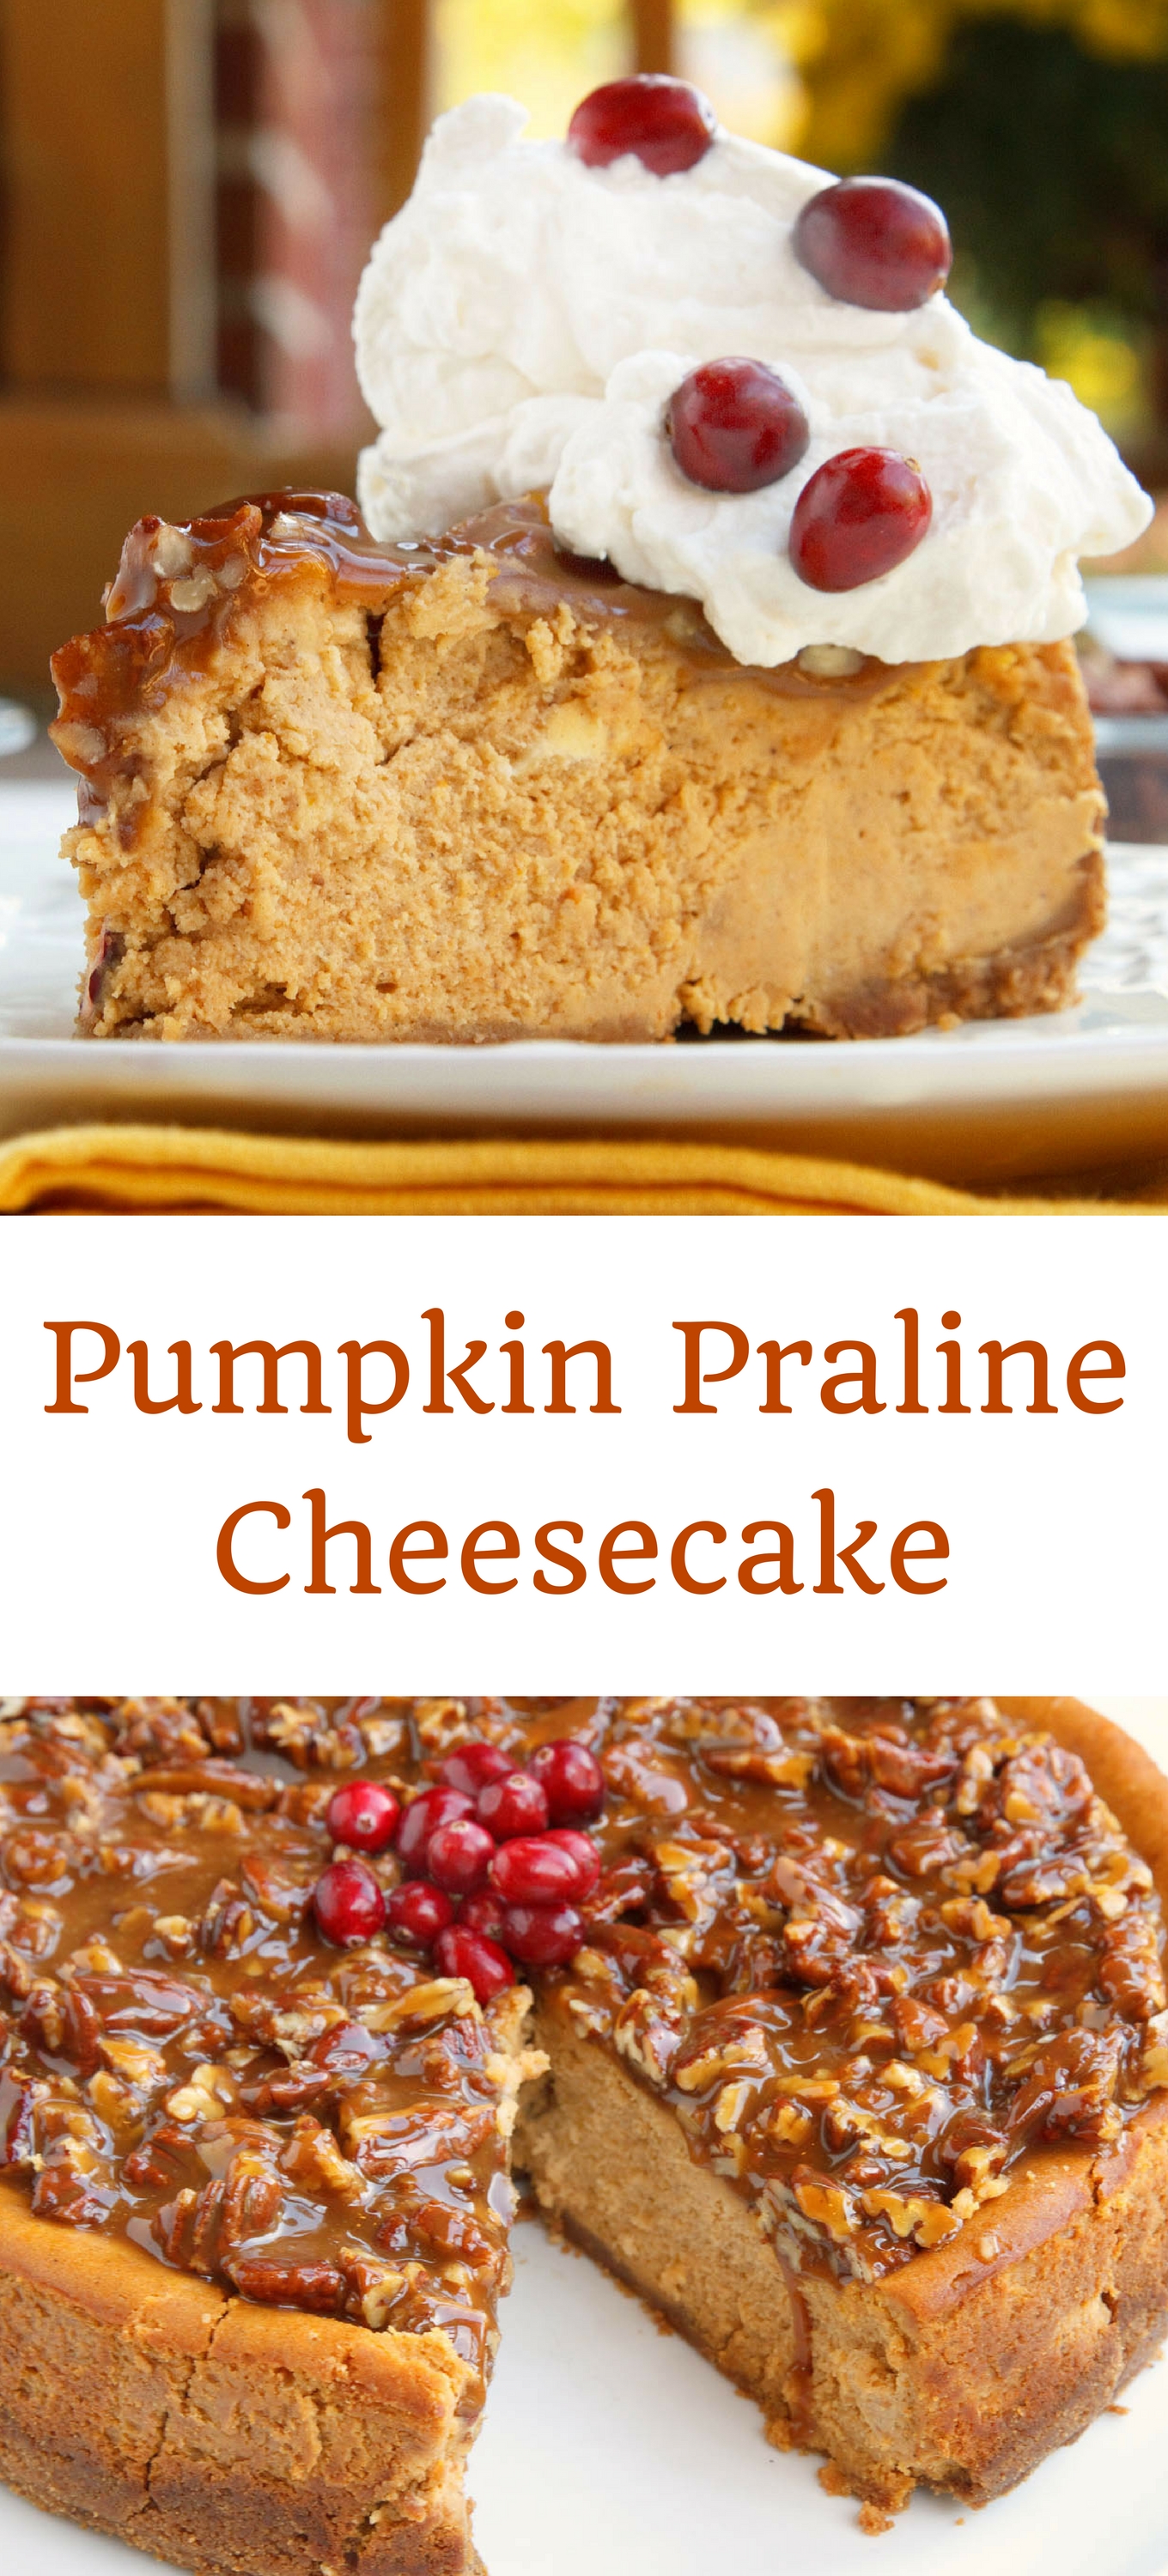 Pumpkin Praline Cheesecake Recipe for your Fall and Holiday Table